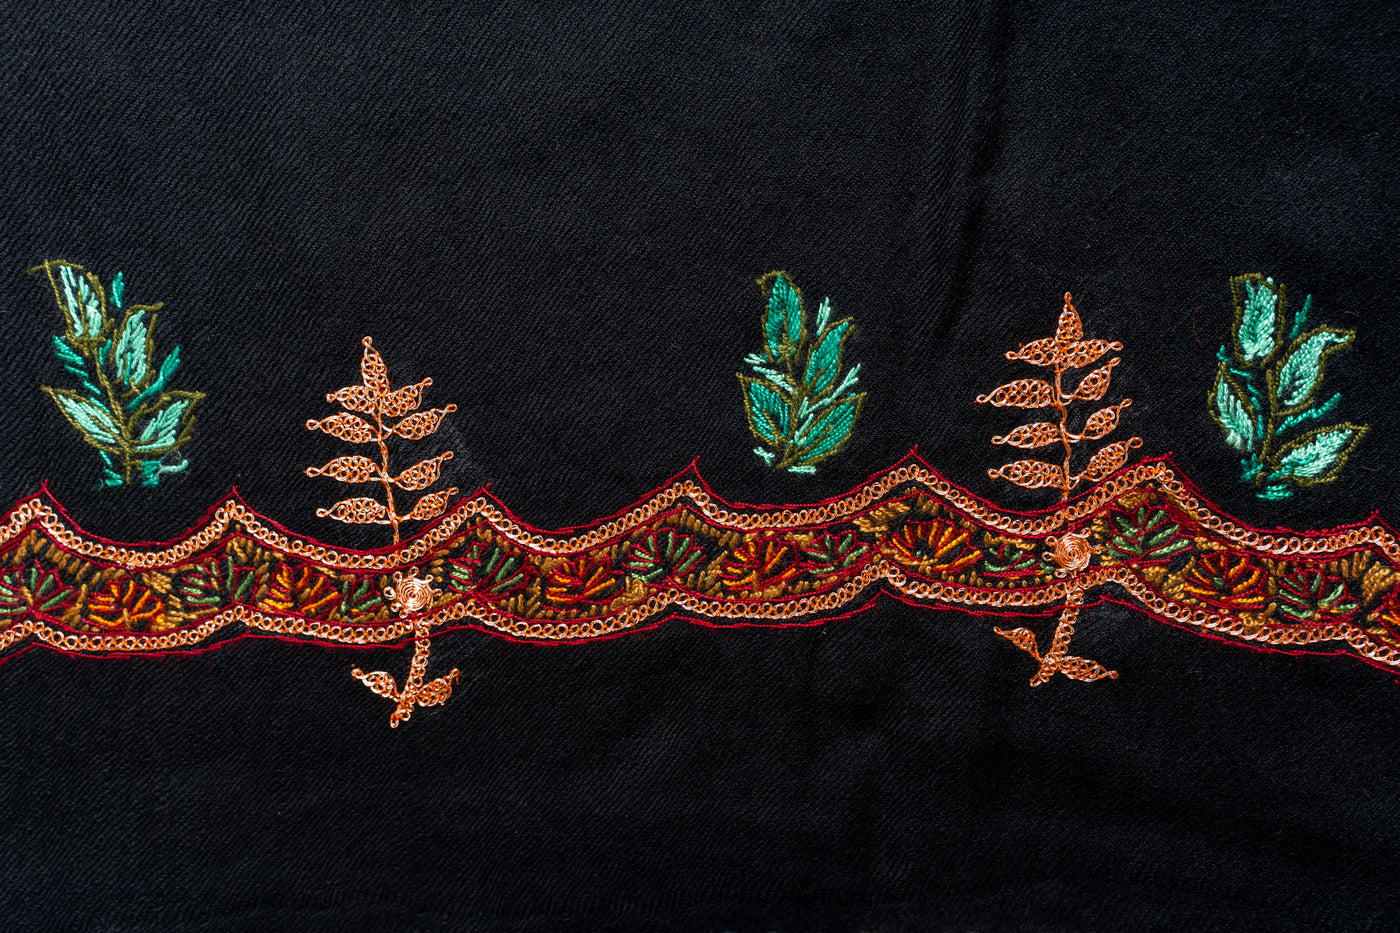 Shafak-e-Tilla: Kashmiri Hand Embroidered suit with combination of Sozni and Hand-Tilla Embroidery